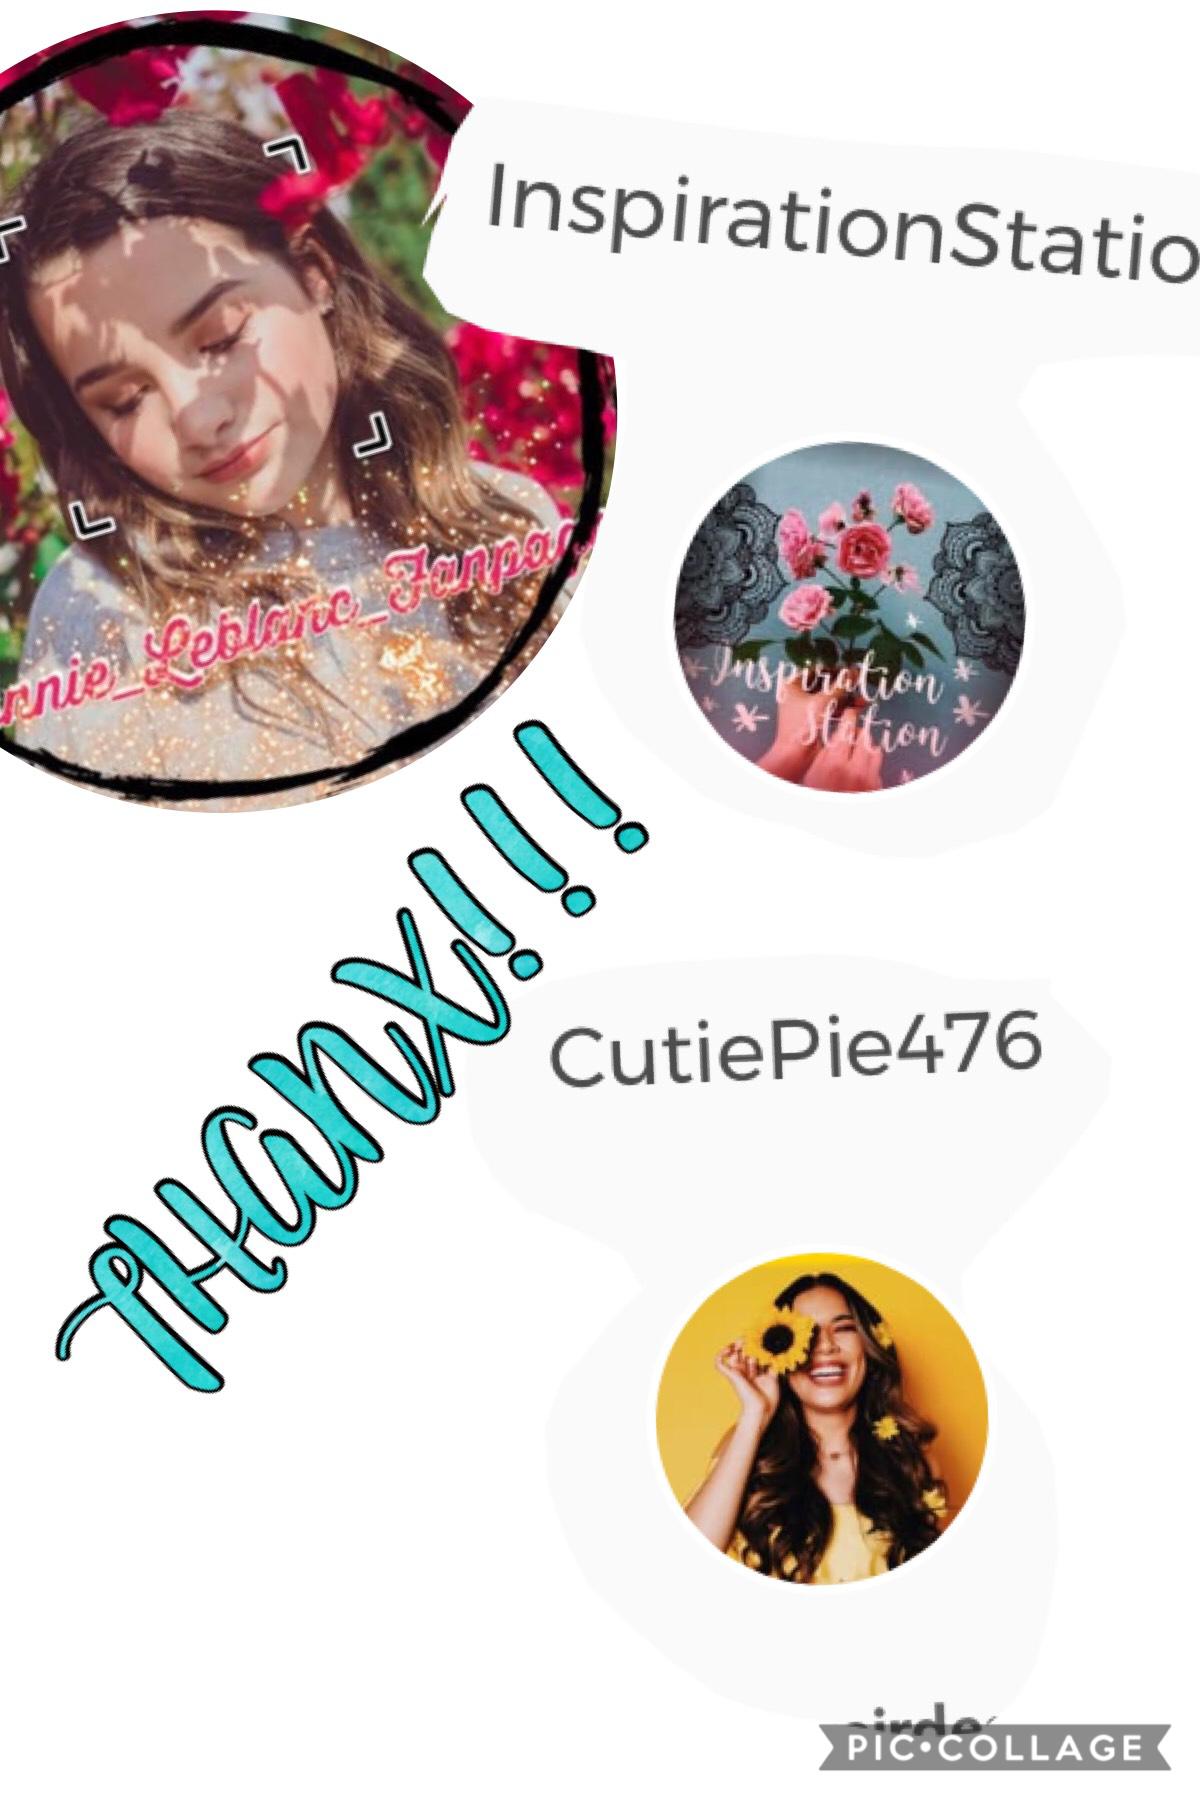 Thank you so much!! Go follow both her accnts!! 